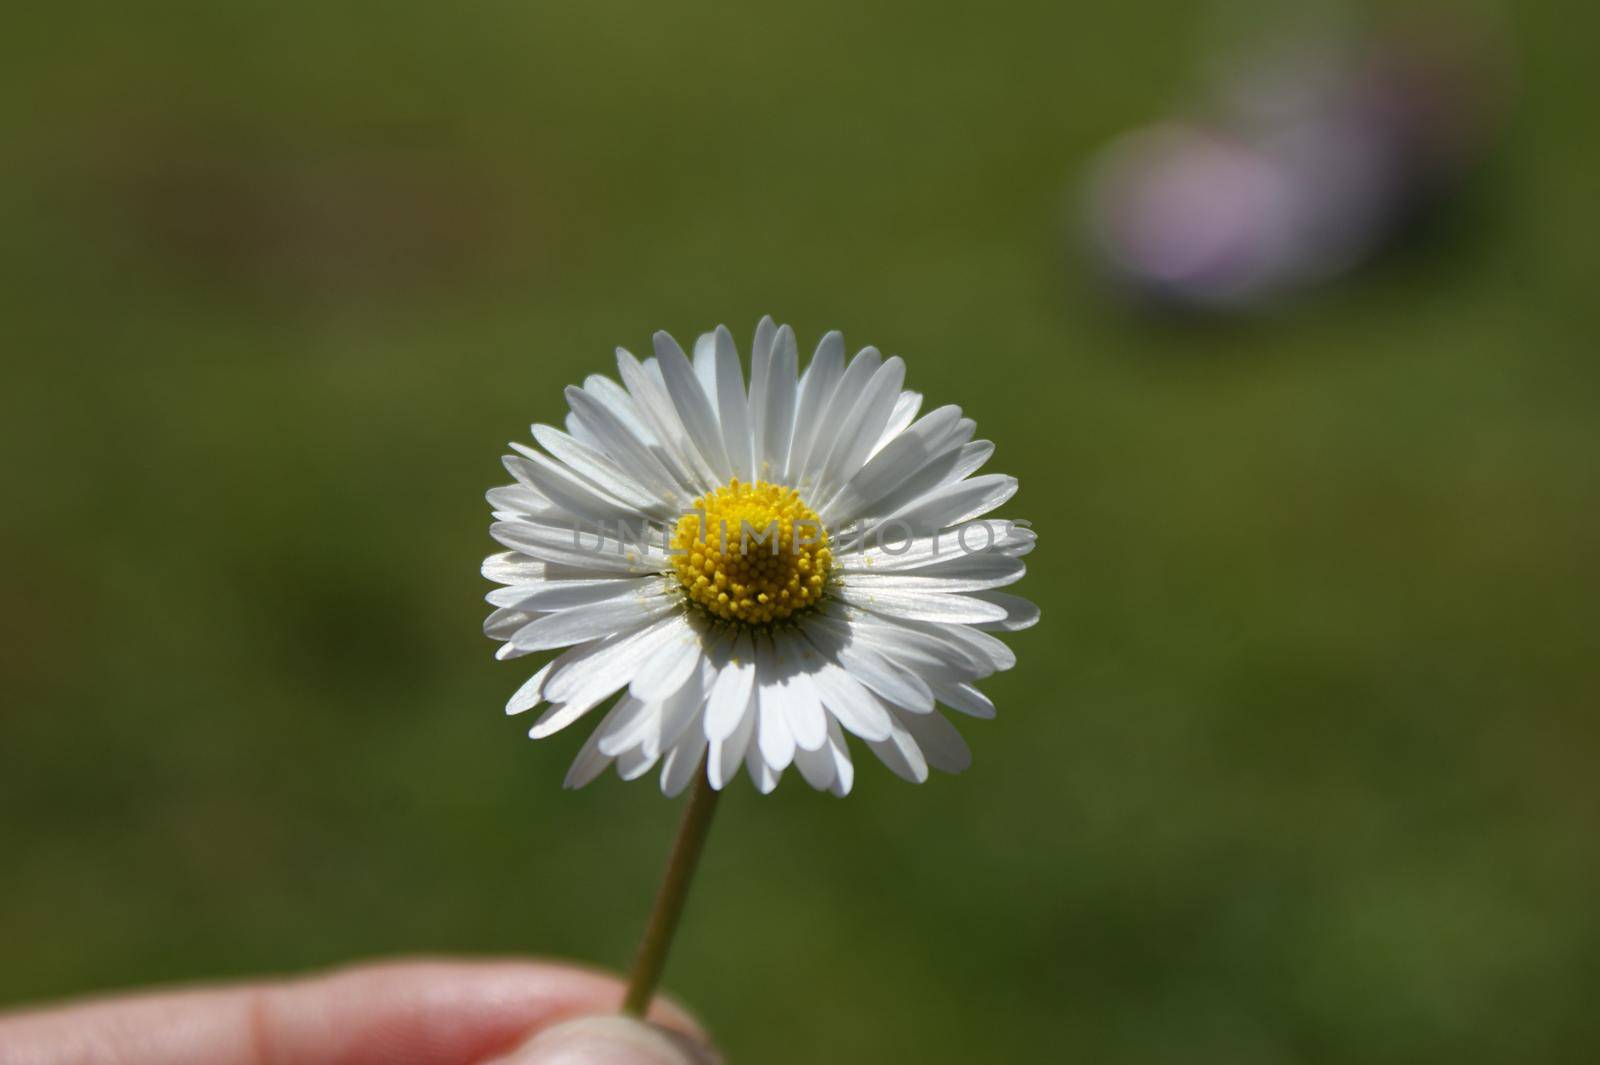 Small daisy held in a hand with a green grass bokeh background by LeoniekvanderVliet